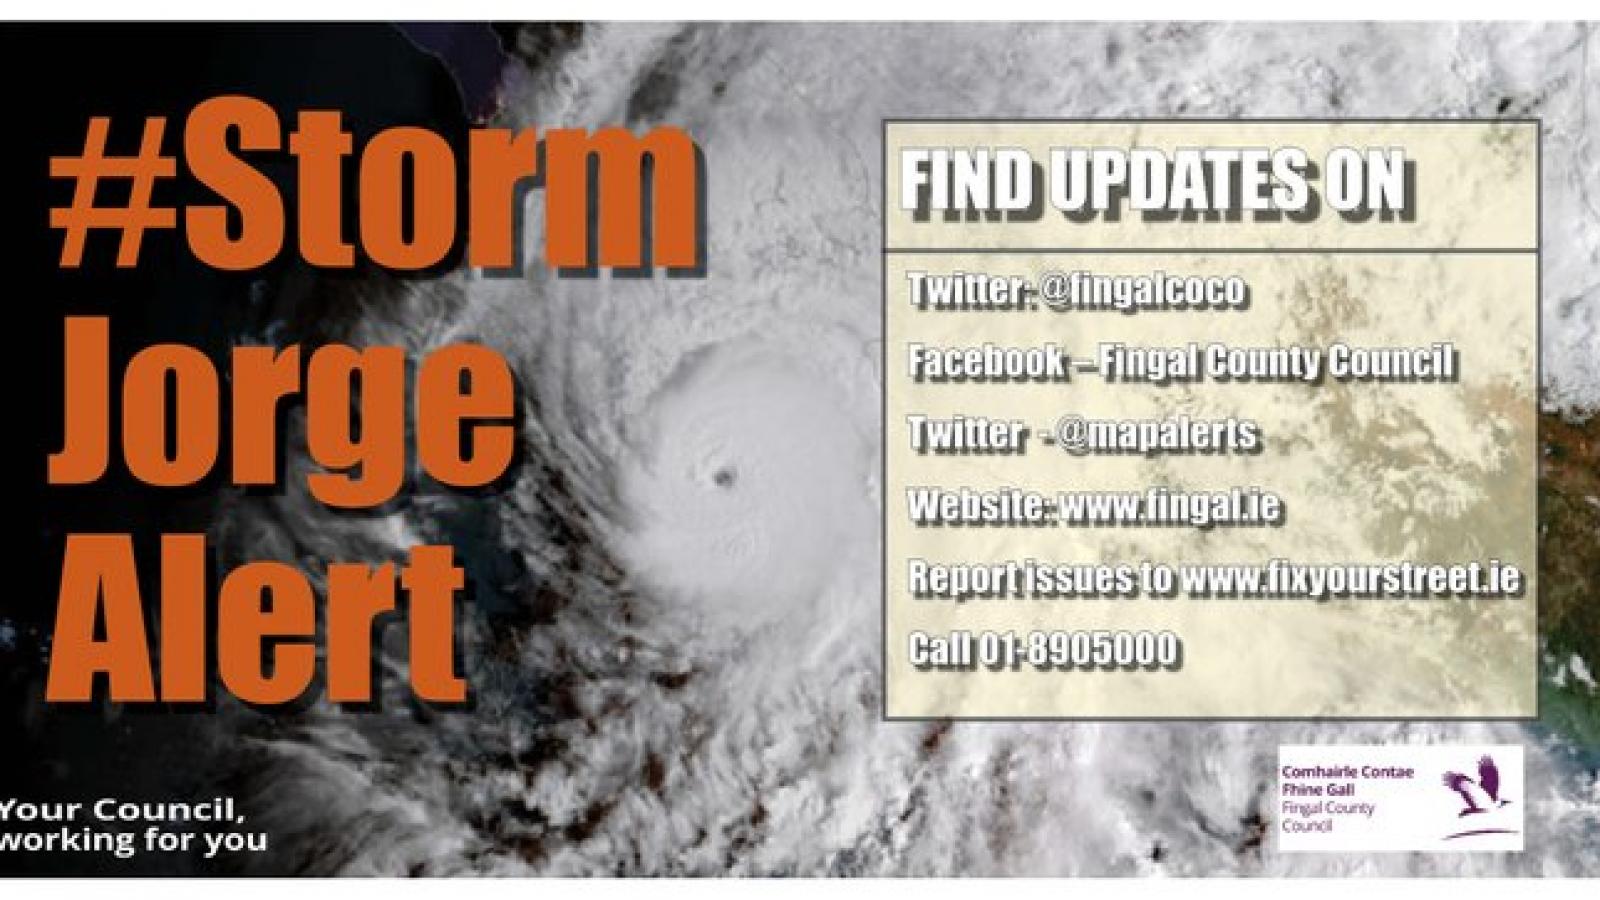 An image advising people on Storm Jorge alerts